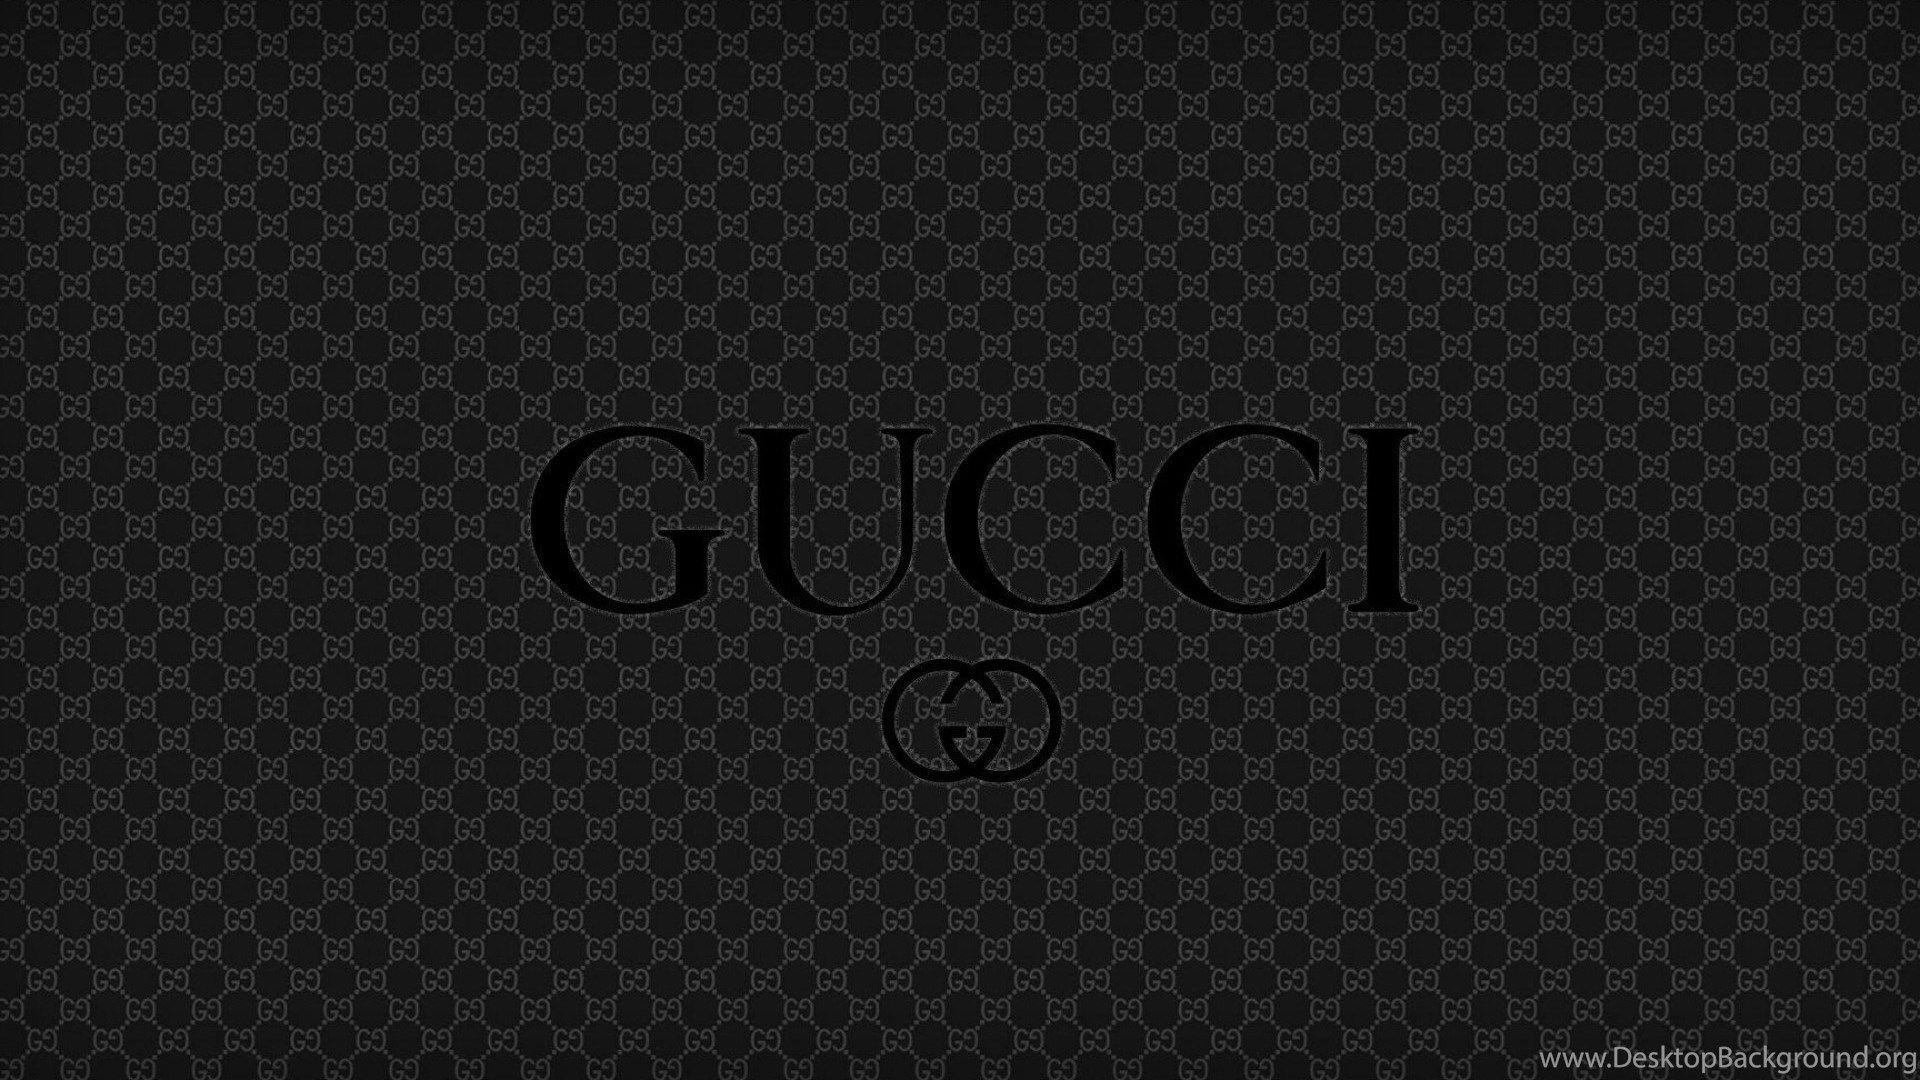 Gucci iPhone Wallpapers Top 25 Best Gucci iPhone Wallpapers  Getty  Wallpapers